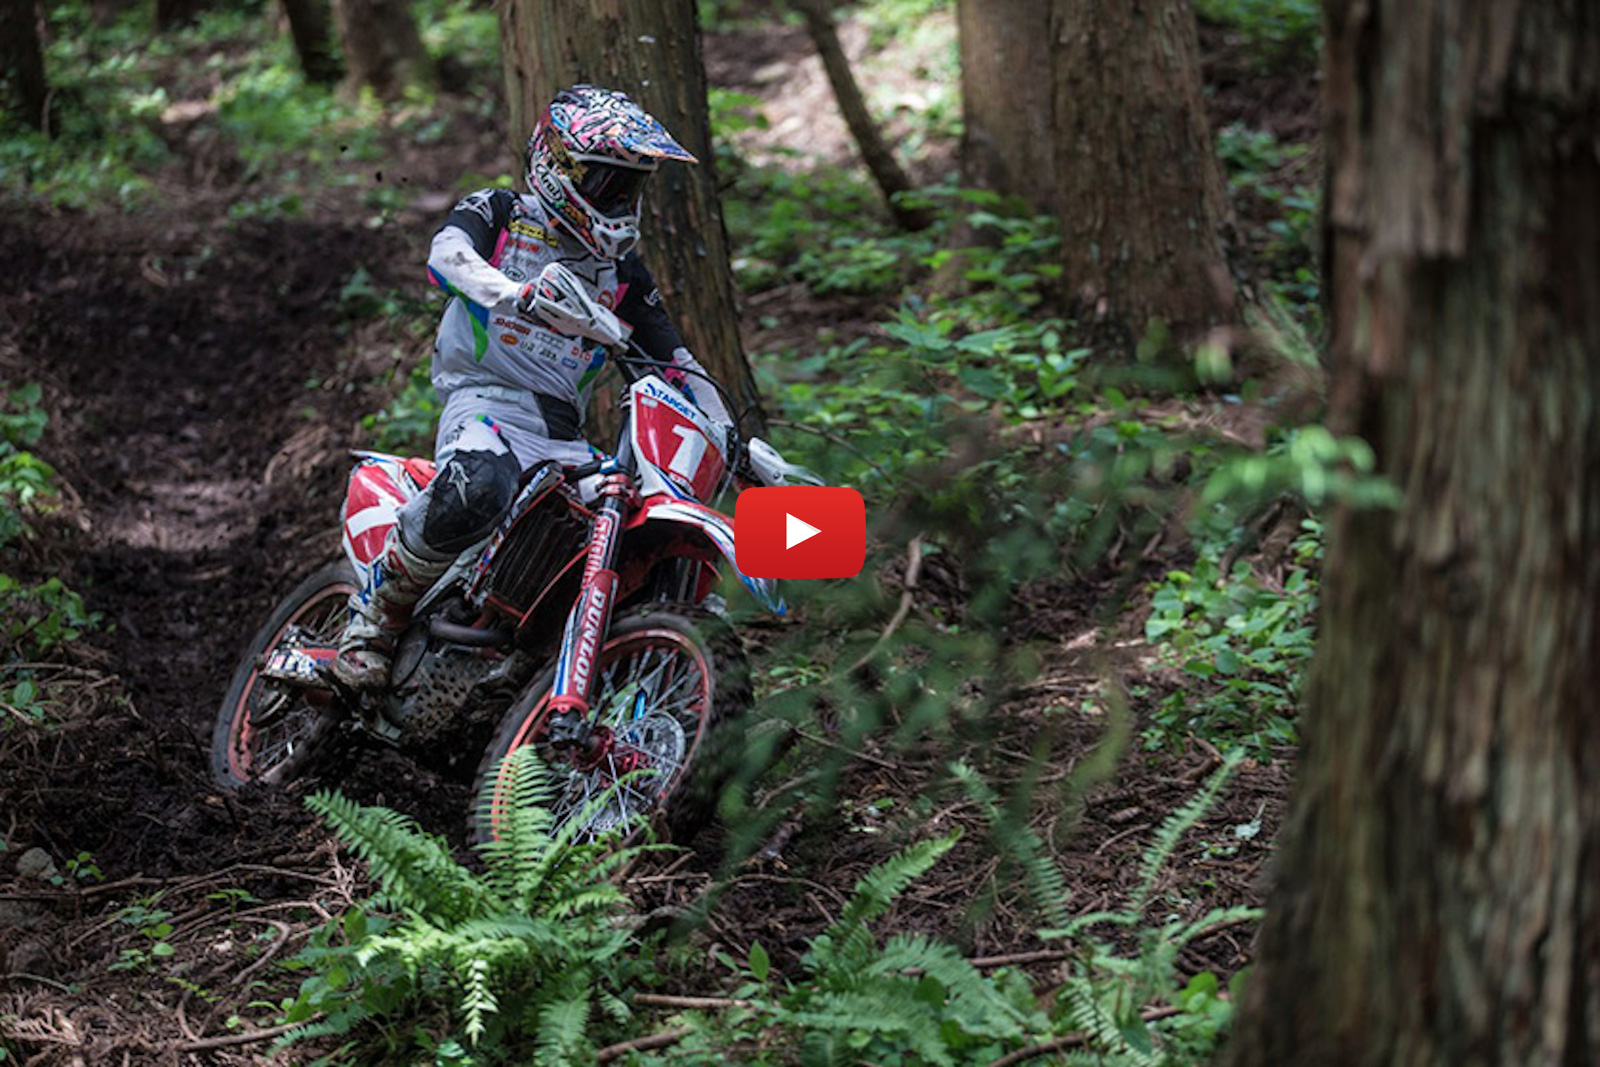 CRF450RX versus YZ125 for Japanese Enduro Championship honours